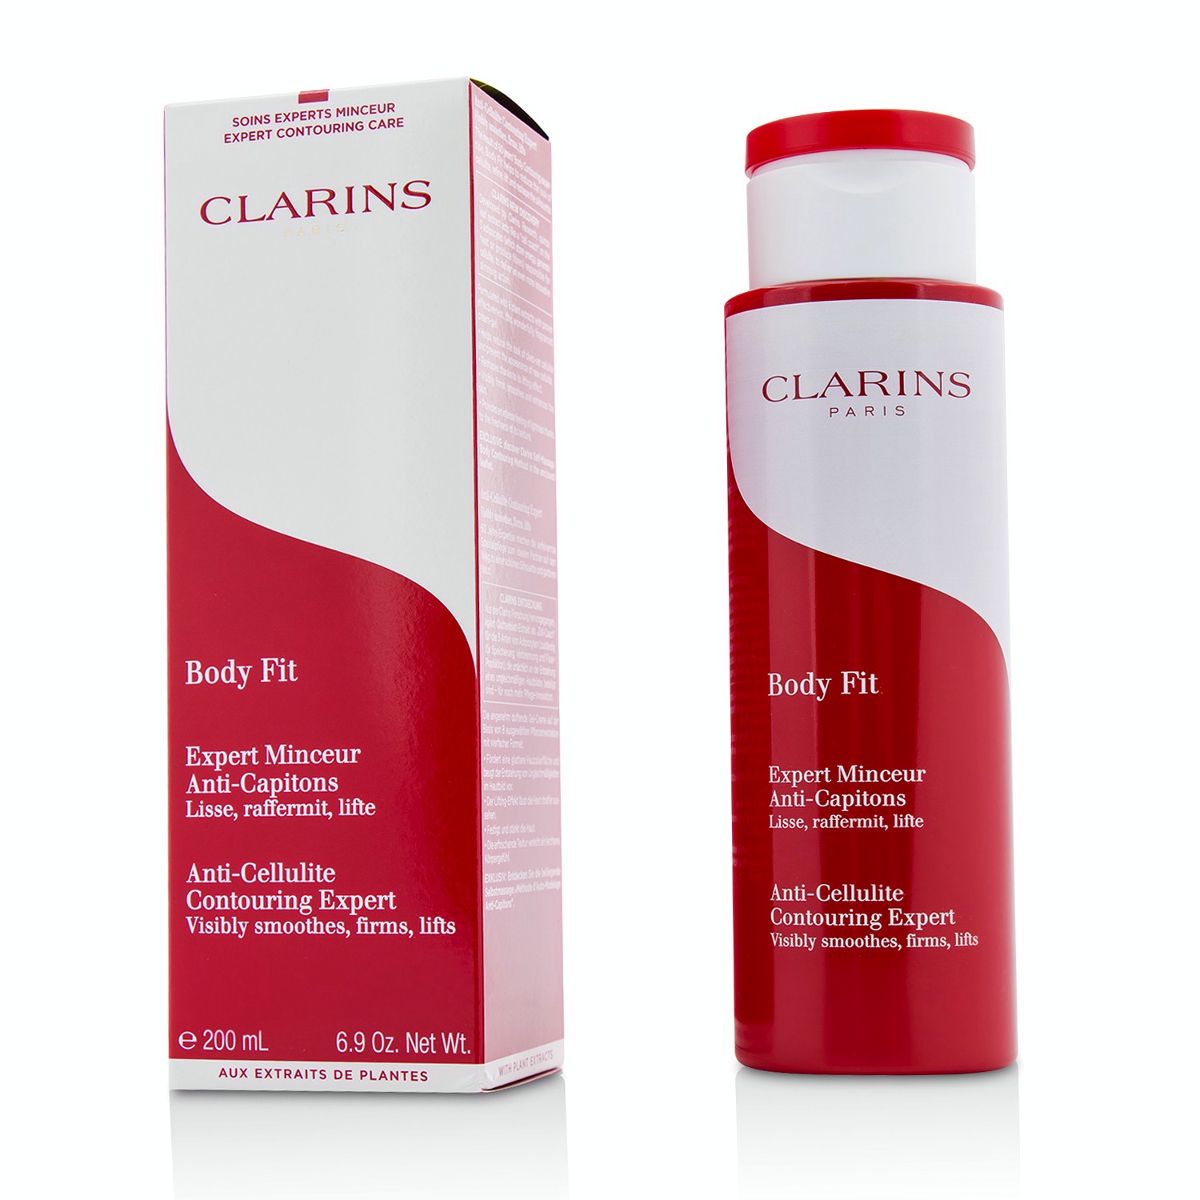 Body Fit Anti-Cellulite Contouring Expert Clarins Image